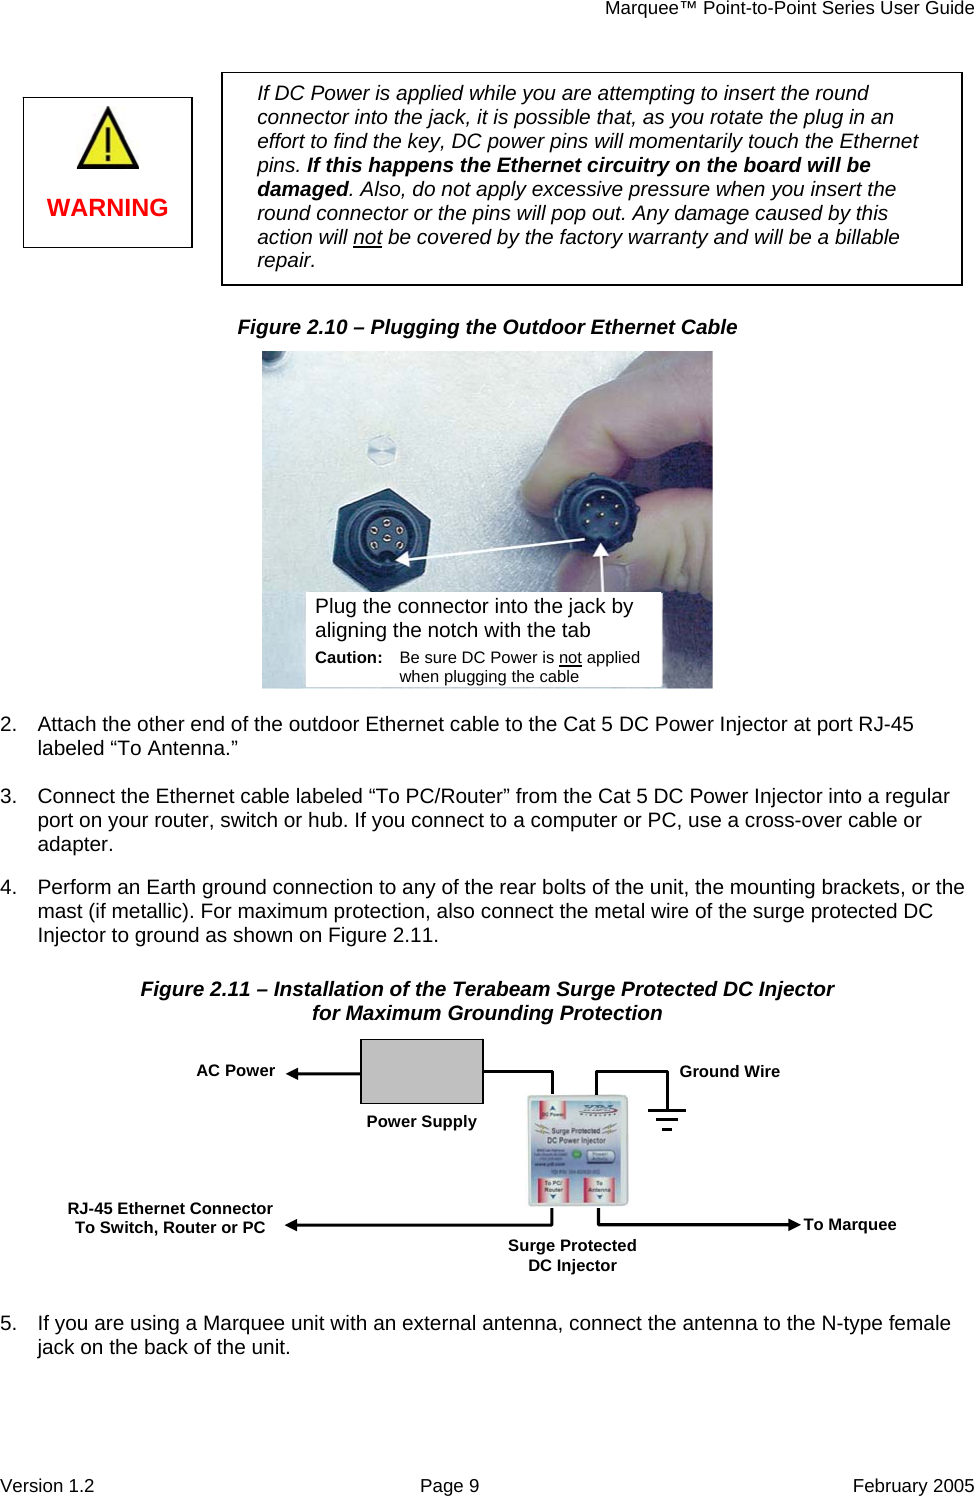     Marquee™ Point-to-Point Series User Guide Figure 2.10 – Plugging the Outdoor Ethernet Cable   2.  Attach the other end of the outdoor Ethernet cable to ctor at port RJ-45 labeled “To Antenna.”  3.  Connect the Ethernet cabl PC/Router”  r Injector into a regular port on your router, switch or hub. If you connect to a computer or PC, use a cross-over cable or adapter.  4.  Perform an Earth ground connection to any of the rear bolts of the unit, the mounting brackets, or the mast (if metallic). For maximum protection, also connect the metal wire of the surge protected DC Injector to ground as shown on Figure 2.11. Figure 2.11 – Installation of the Terabeam Surge d DC Injector for Maximum Grounding Protection  5.   the Cat 5 DC Power Injee labeled “To  from the Cat 5 DC Powe ProtecteIf you are using a Marquee unit with an external antenna, connect the antenna to the N-type female jack on the back of the unit. RJ-45 Ethernet Connector To Switch, Router or PC  To Marquee Surge Protected DC Injector AC Power Power SupplyGround Wire Plug the connector into the jack by aligning the notch with the tab Caution not:  Be sure DC Power is when plugging the c  applied ableIf DC Power is applied while you are attempting to insert the round   effort to find the key, DC power pins will momentarily touch the Ethernet pins.  Ethernet circuitry on the board will be dama lso, do not apply excessive pressure when you insert the round connector or the pins will pop out. Any damage caused by this action will notconnector into the jack, it is possible that, as you rotate the plug in anIf this happens the ged. A be covered by the factory warranty and will be a billable repair. WARNING   Version 1.2  Page 9  February 2005 